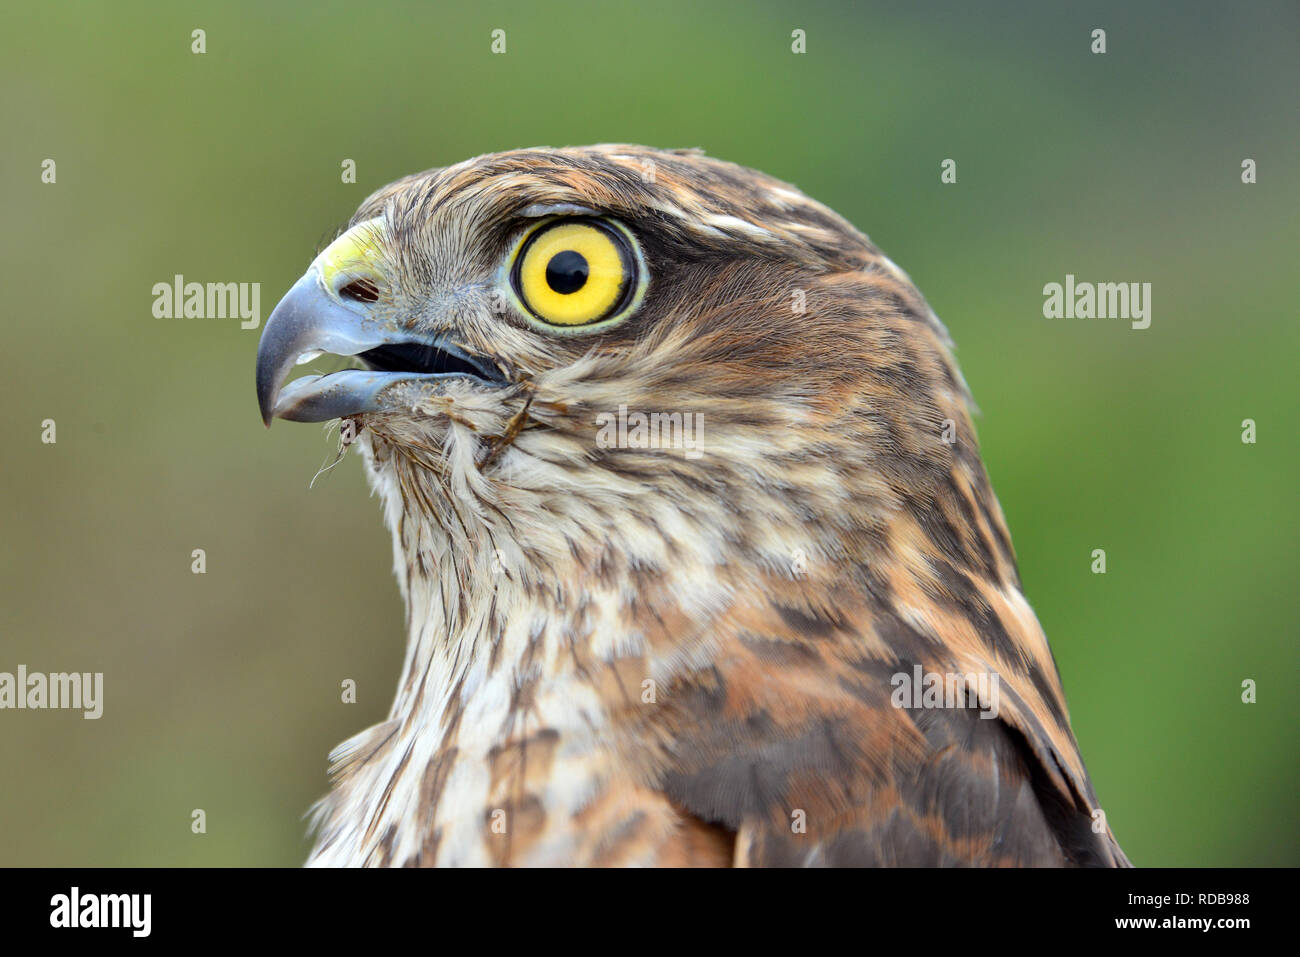 Eurasian sparrowhawk, northern sparrowhawk or simply the sparrowhawk, Sperber, Épervier d'Europe, Accipiter nisus, karvaly Stock Photo